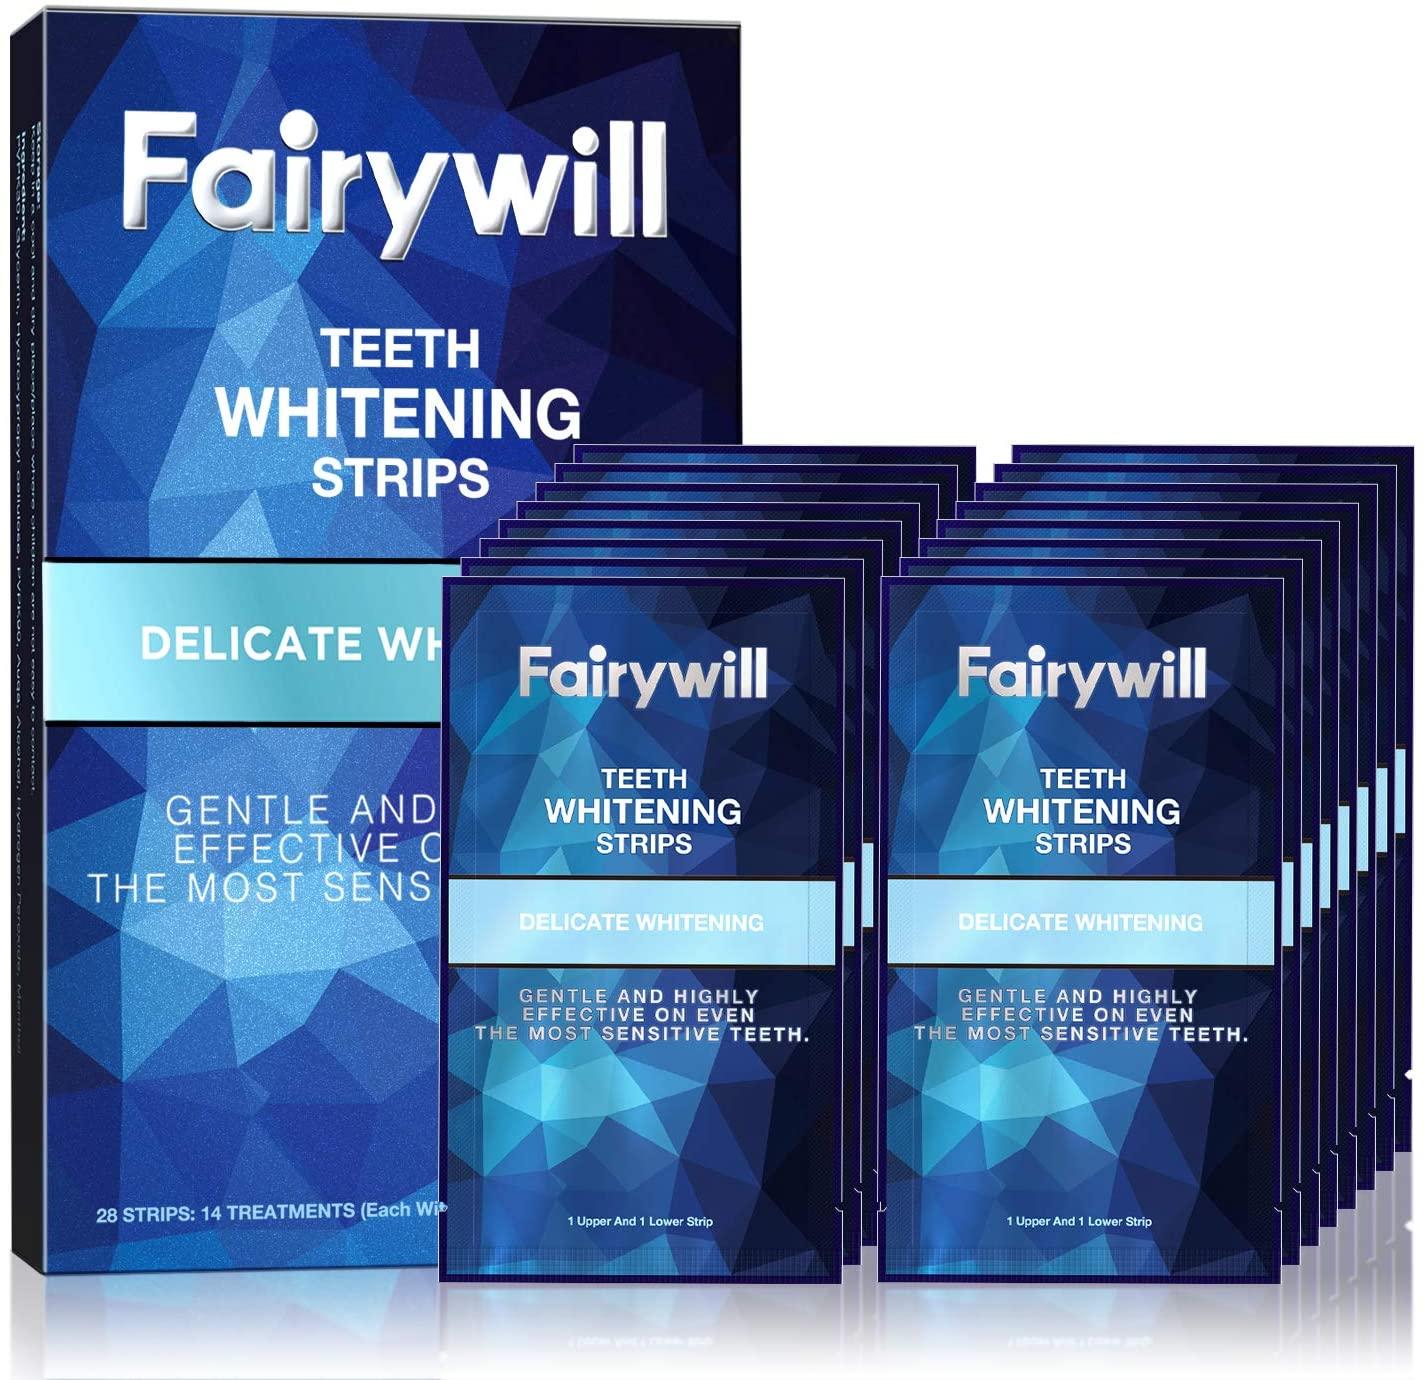 28 Fairywill Teeth Whitening Strips for Sensitive Teeth for $7.99